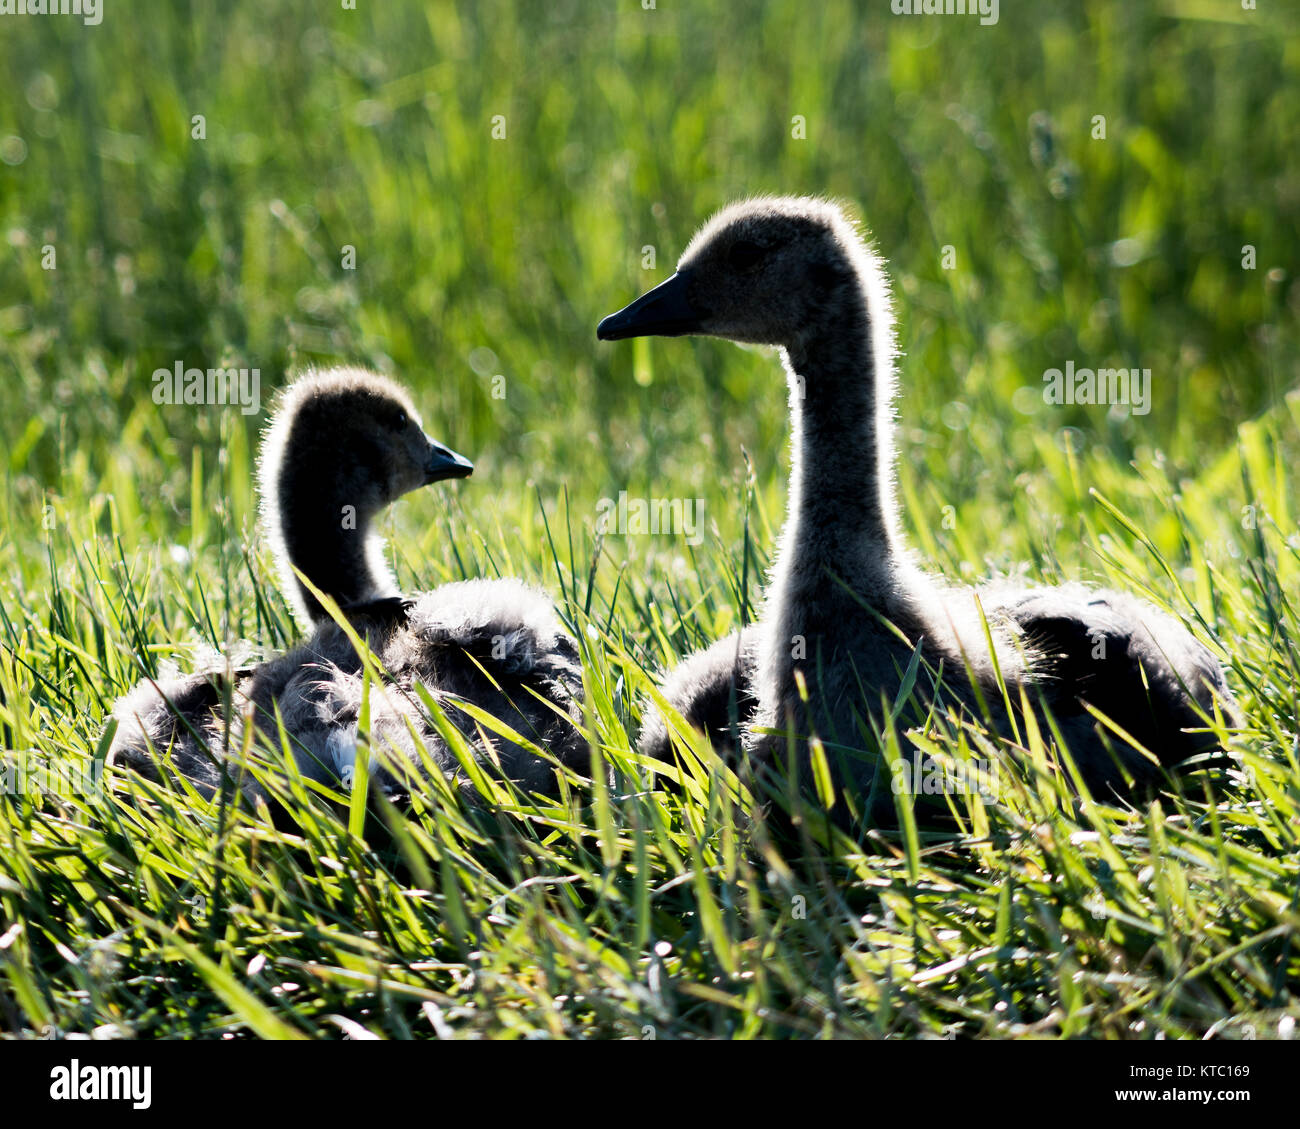 two young geese or goslings sitting in the grass in the morning sun Stock Photo